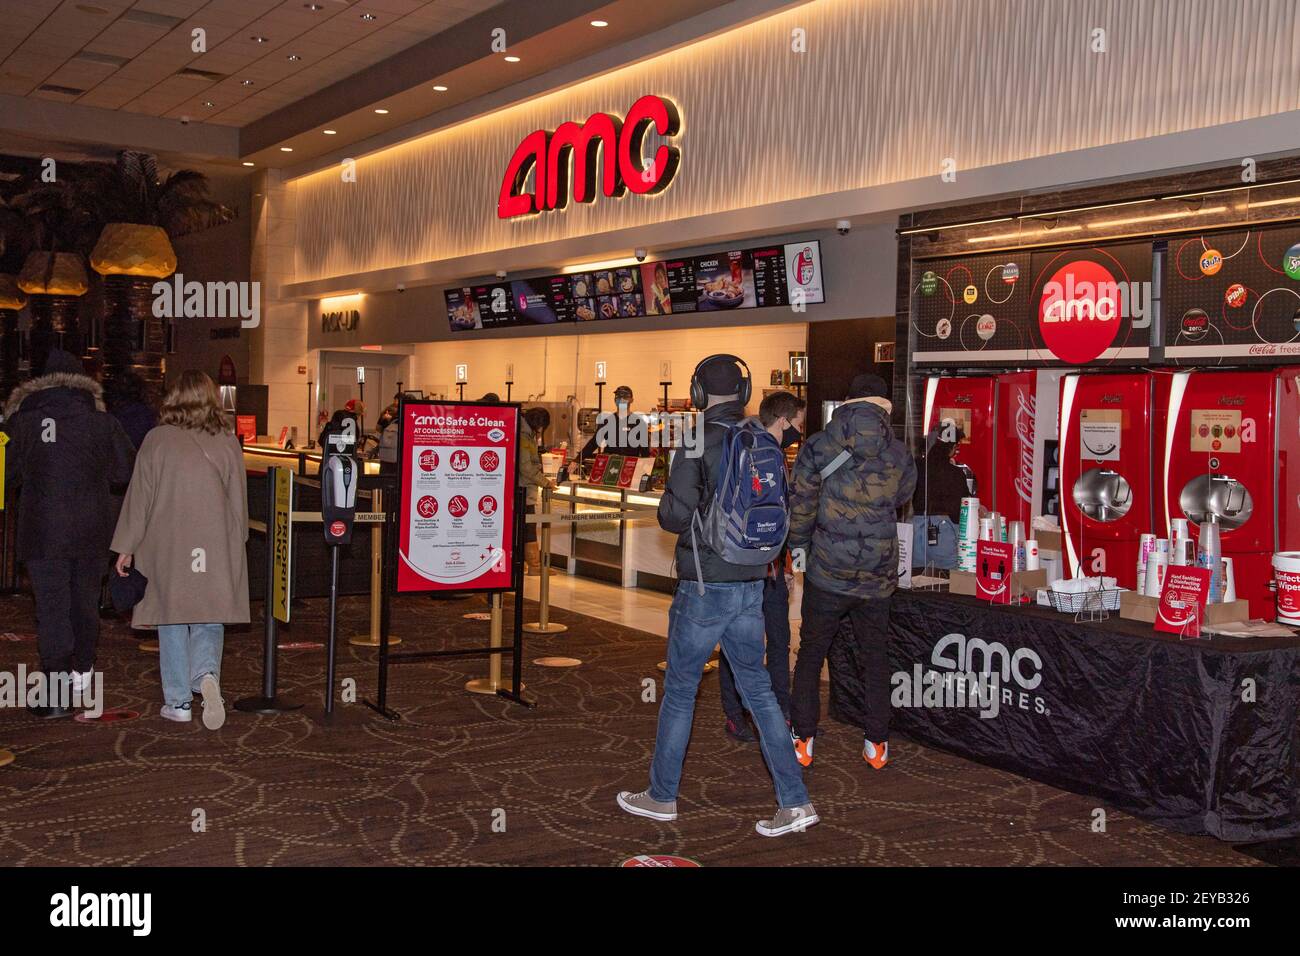 NEW YORK, NY - MARCH 05: Social distancing stickers and signs are seen by the concession stand at the AMC Loews Lincoln Square 13 movie theater on March 05, 2021 in New York City. AMC Theatres reopened its New York area locations today, with new safety precautions in place, for the first time since closing in March because of the coronavirus (COVID-19) pandemic. Stock Photo